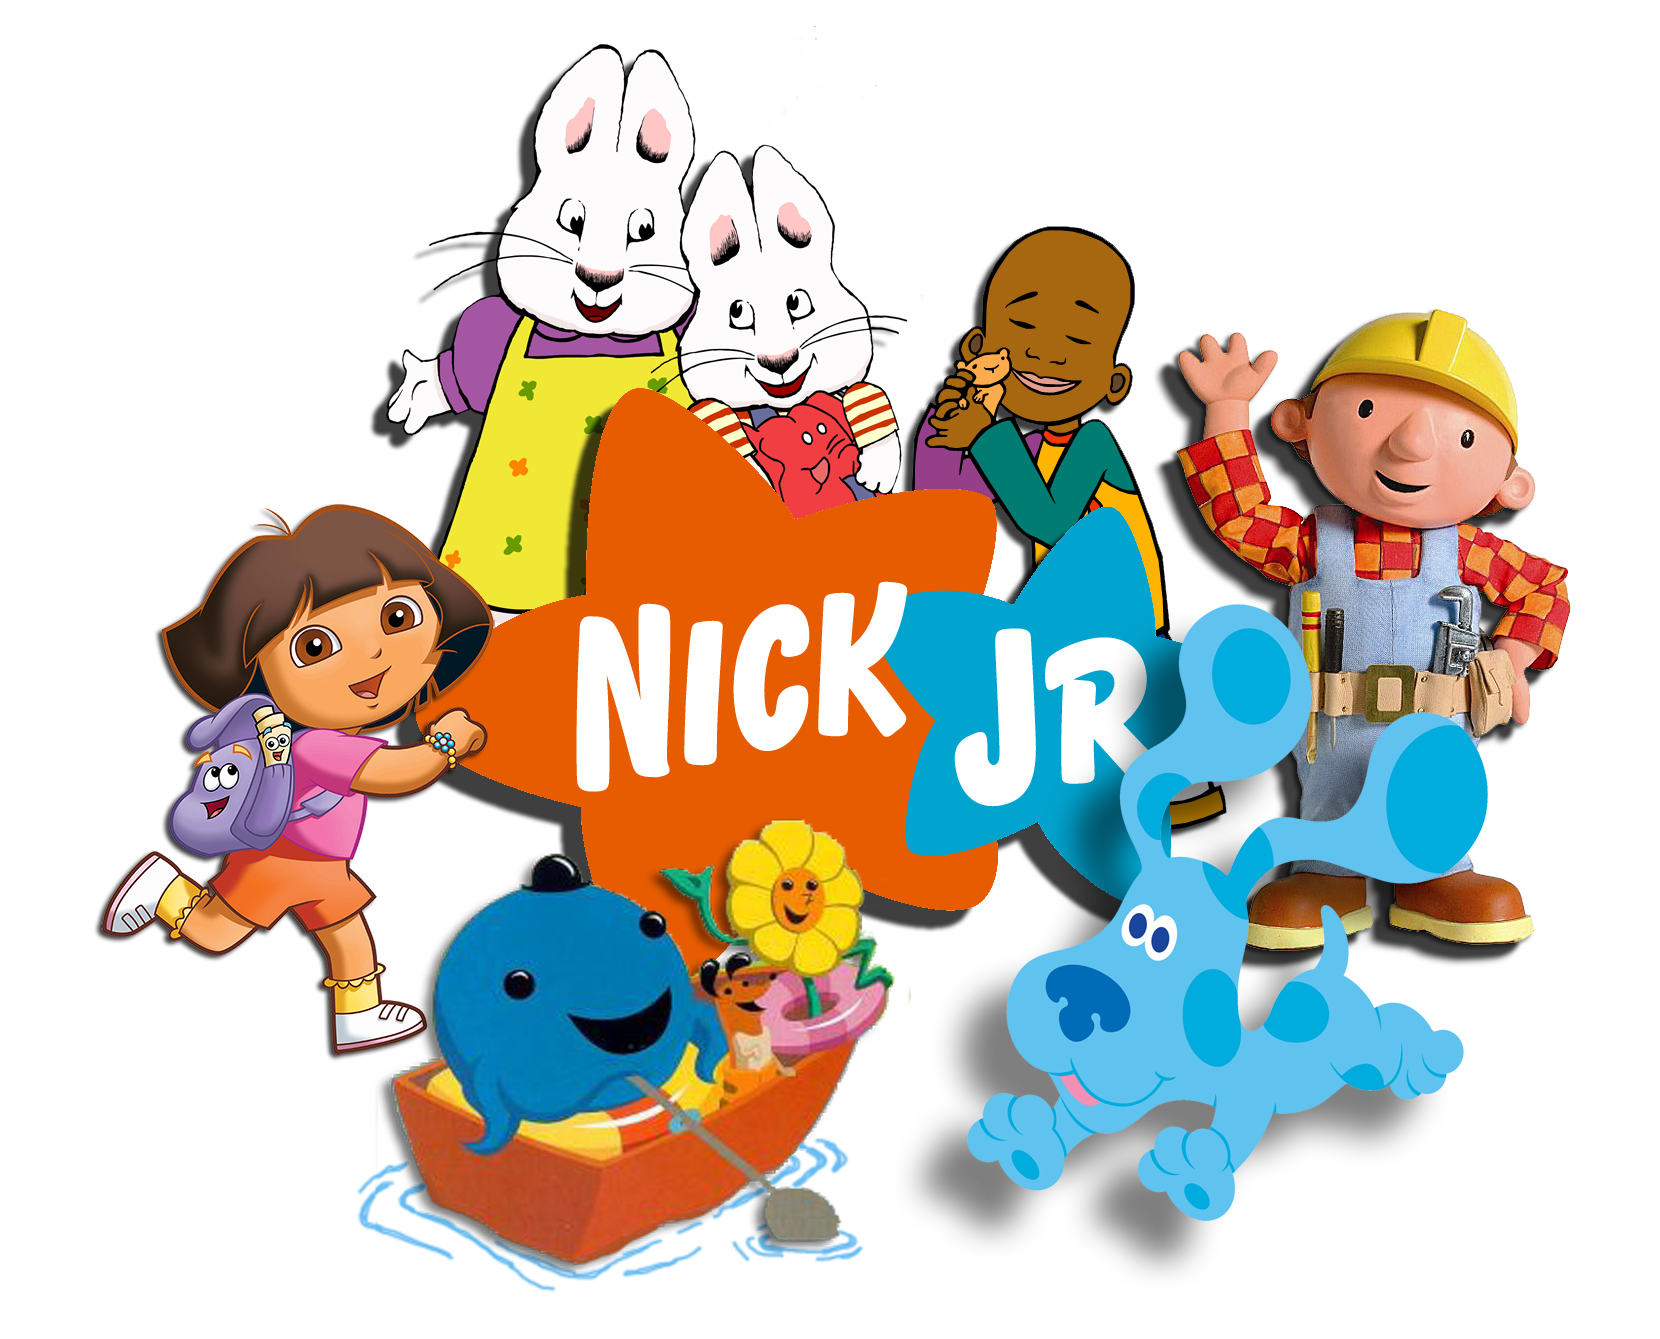 nick jr old shows - how many have you seen?